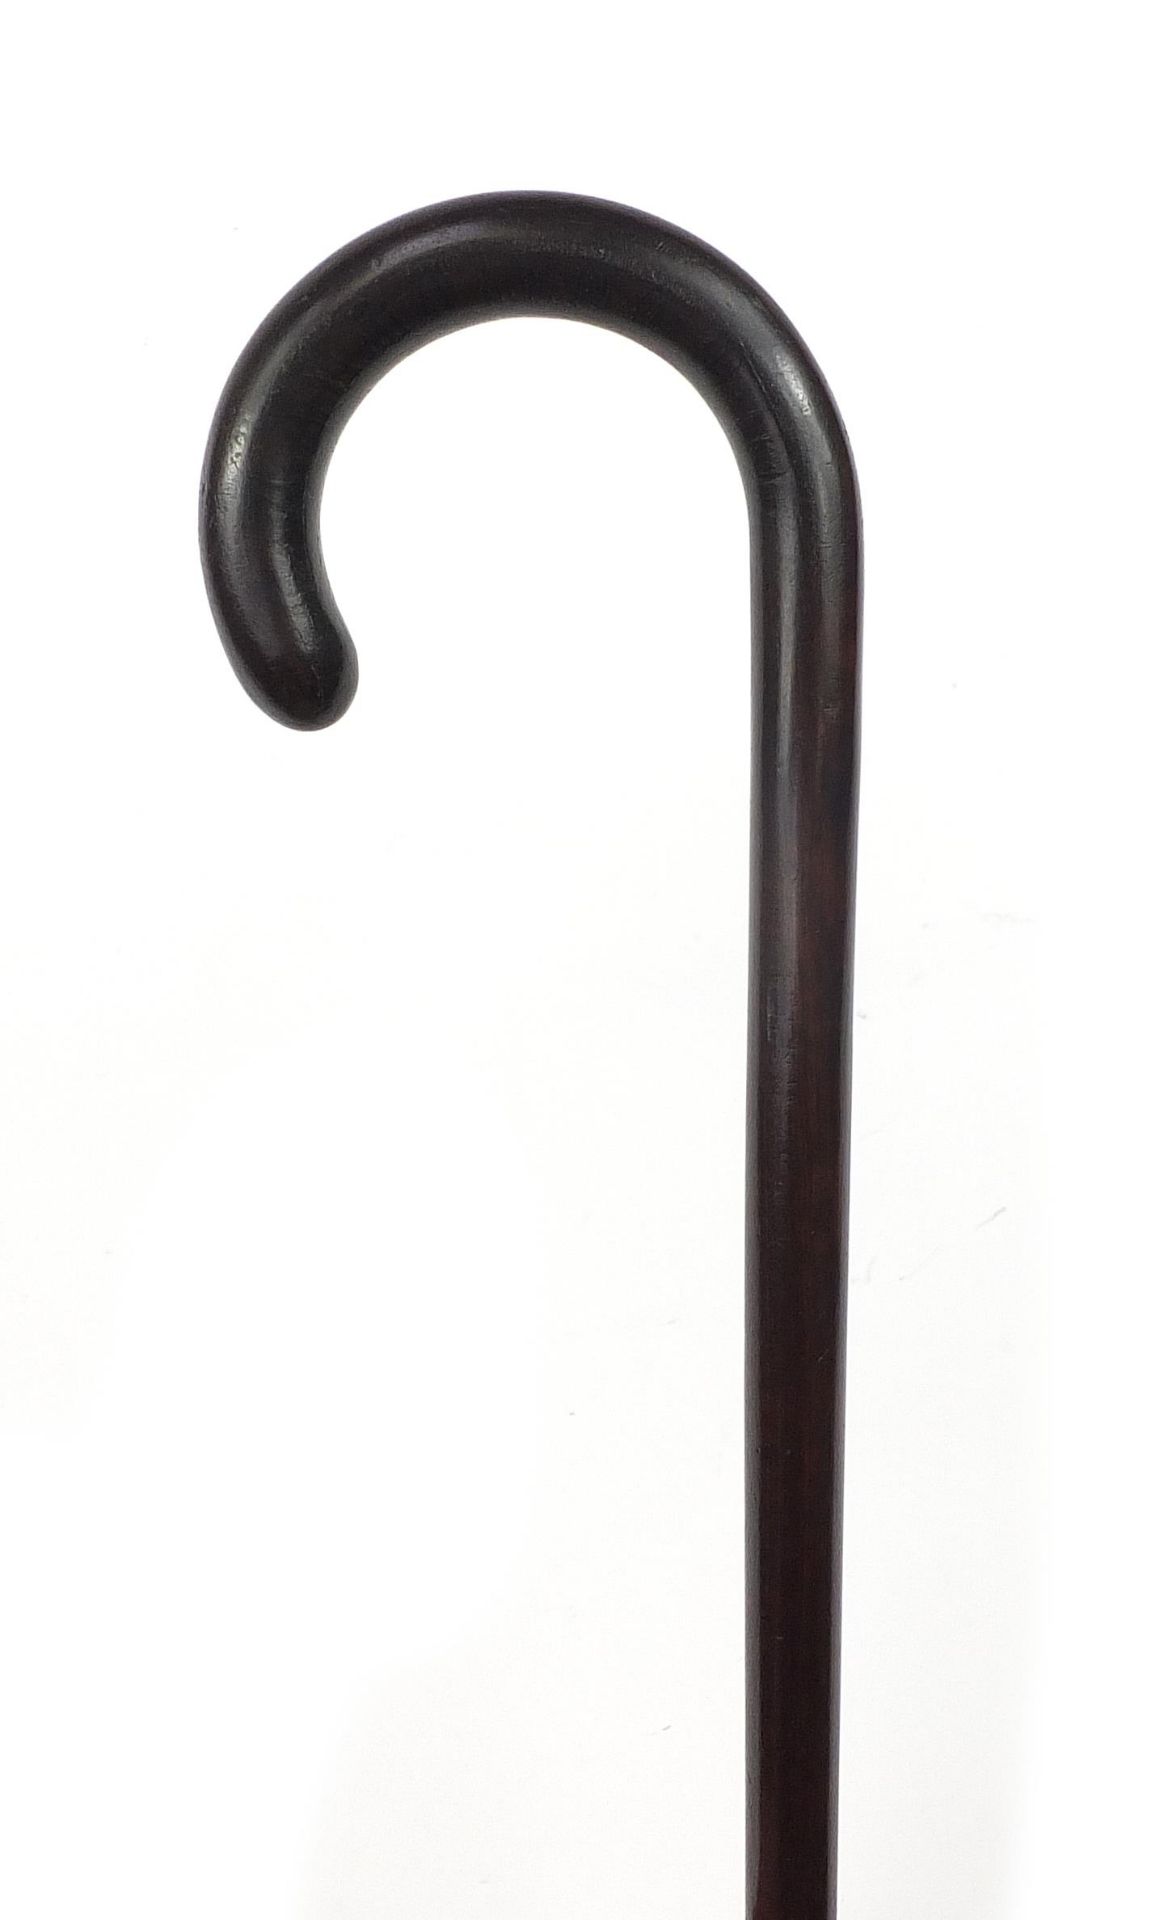 Snakewood walking cane with an ivory ferule, 82cm in length - Image 5 of 6